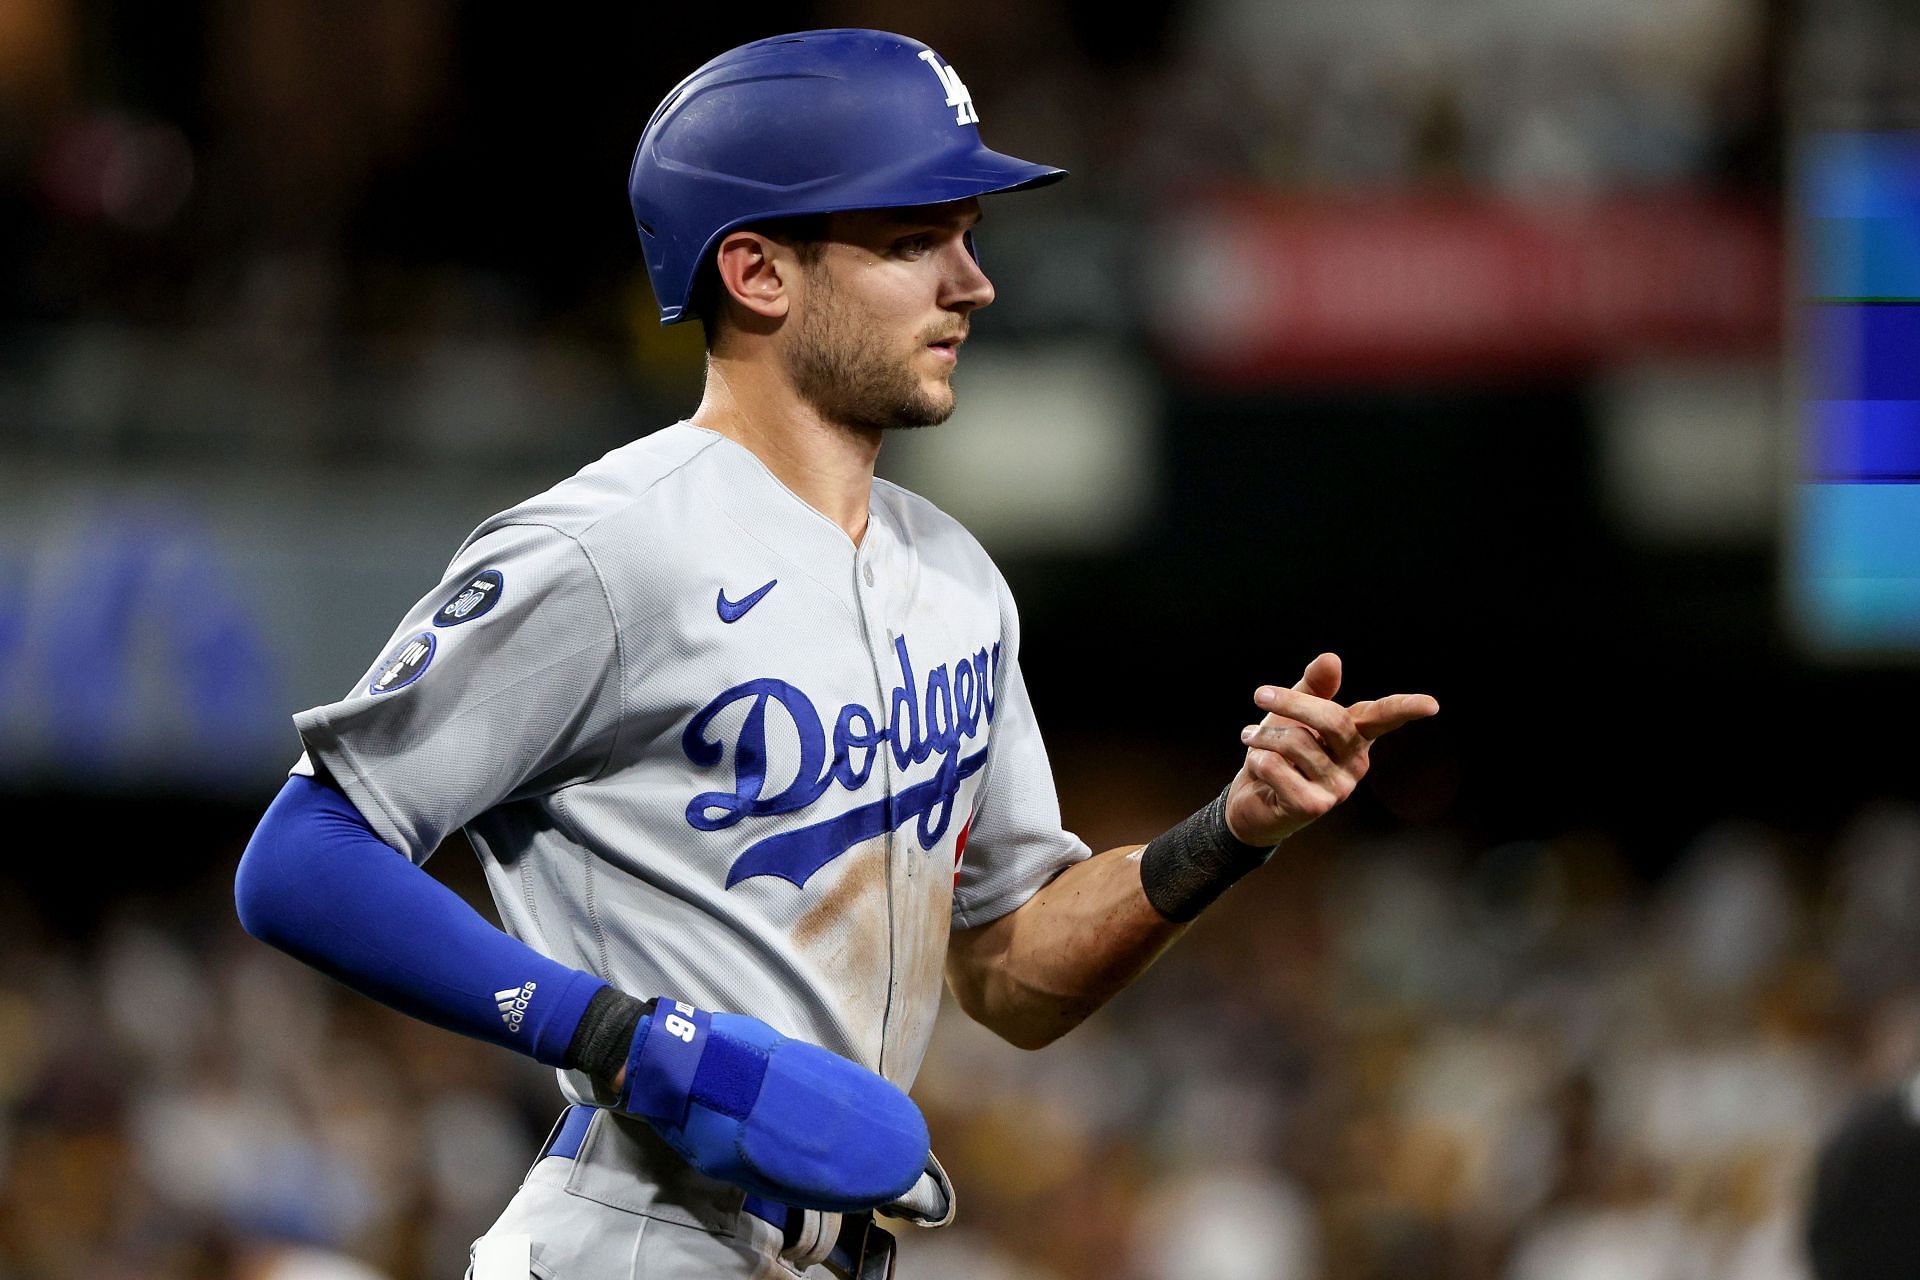 Turner made instant impact upon his arrival at Chavez Ravine.